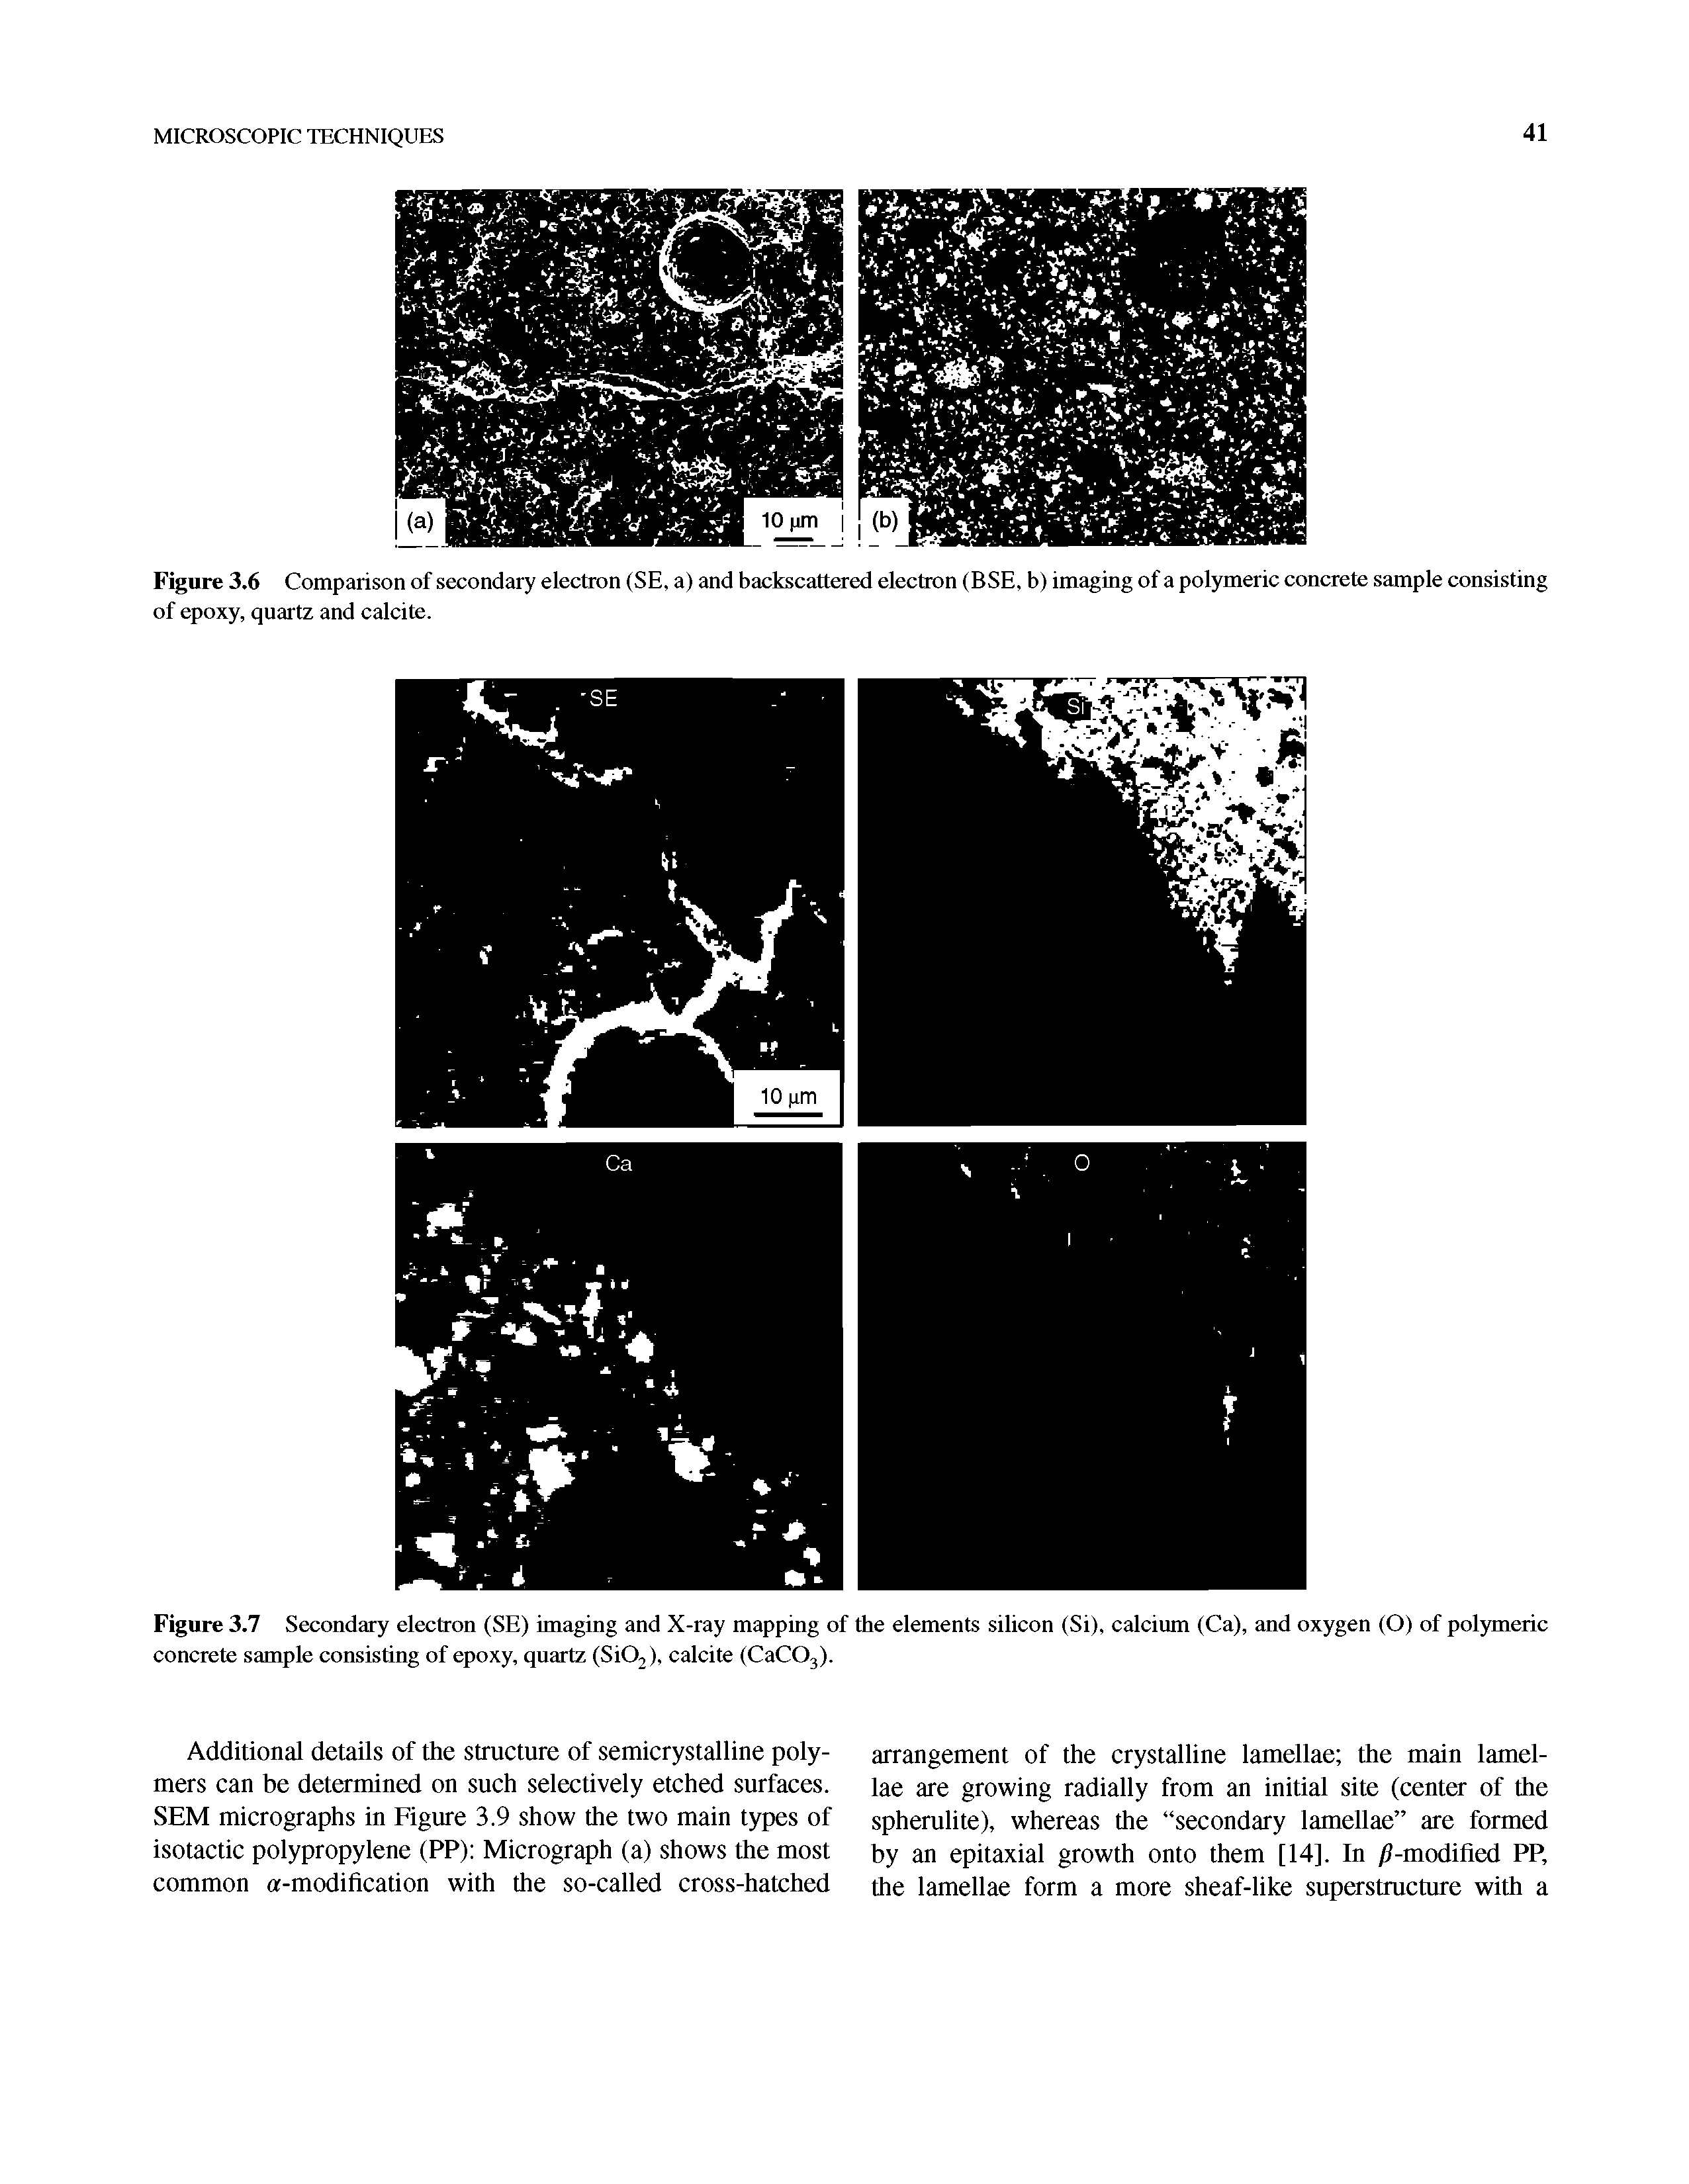 Figure 3.6 Comparison of secondary electron (SE, a) and backscattered electron (BSE, b) imaging of a polymeric concrete sample consisting of epoxy, quartz and calcite.